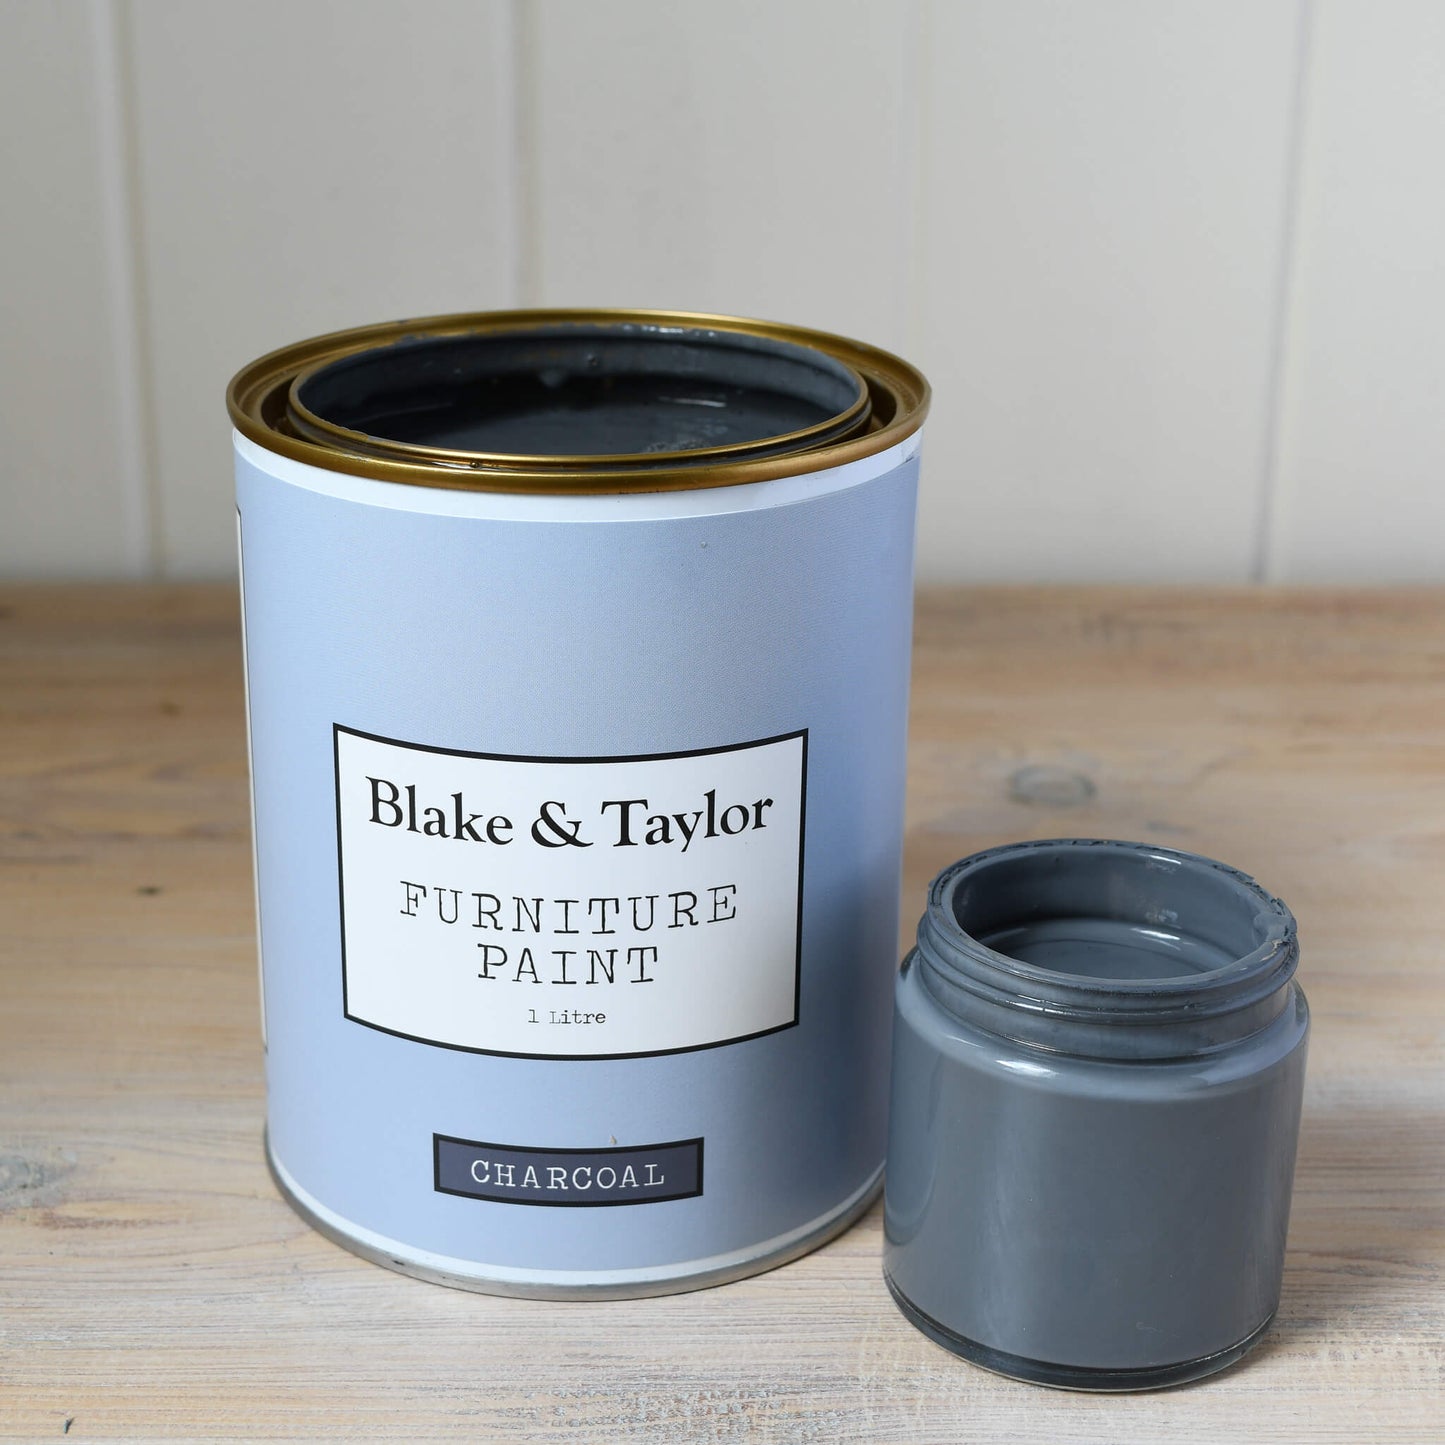 1 litre tin and 120ml pot of Charcoal Blake & Taylor Chalk Furniture Paint